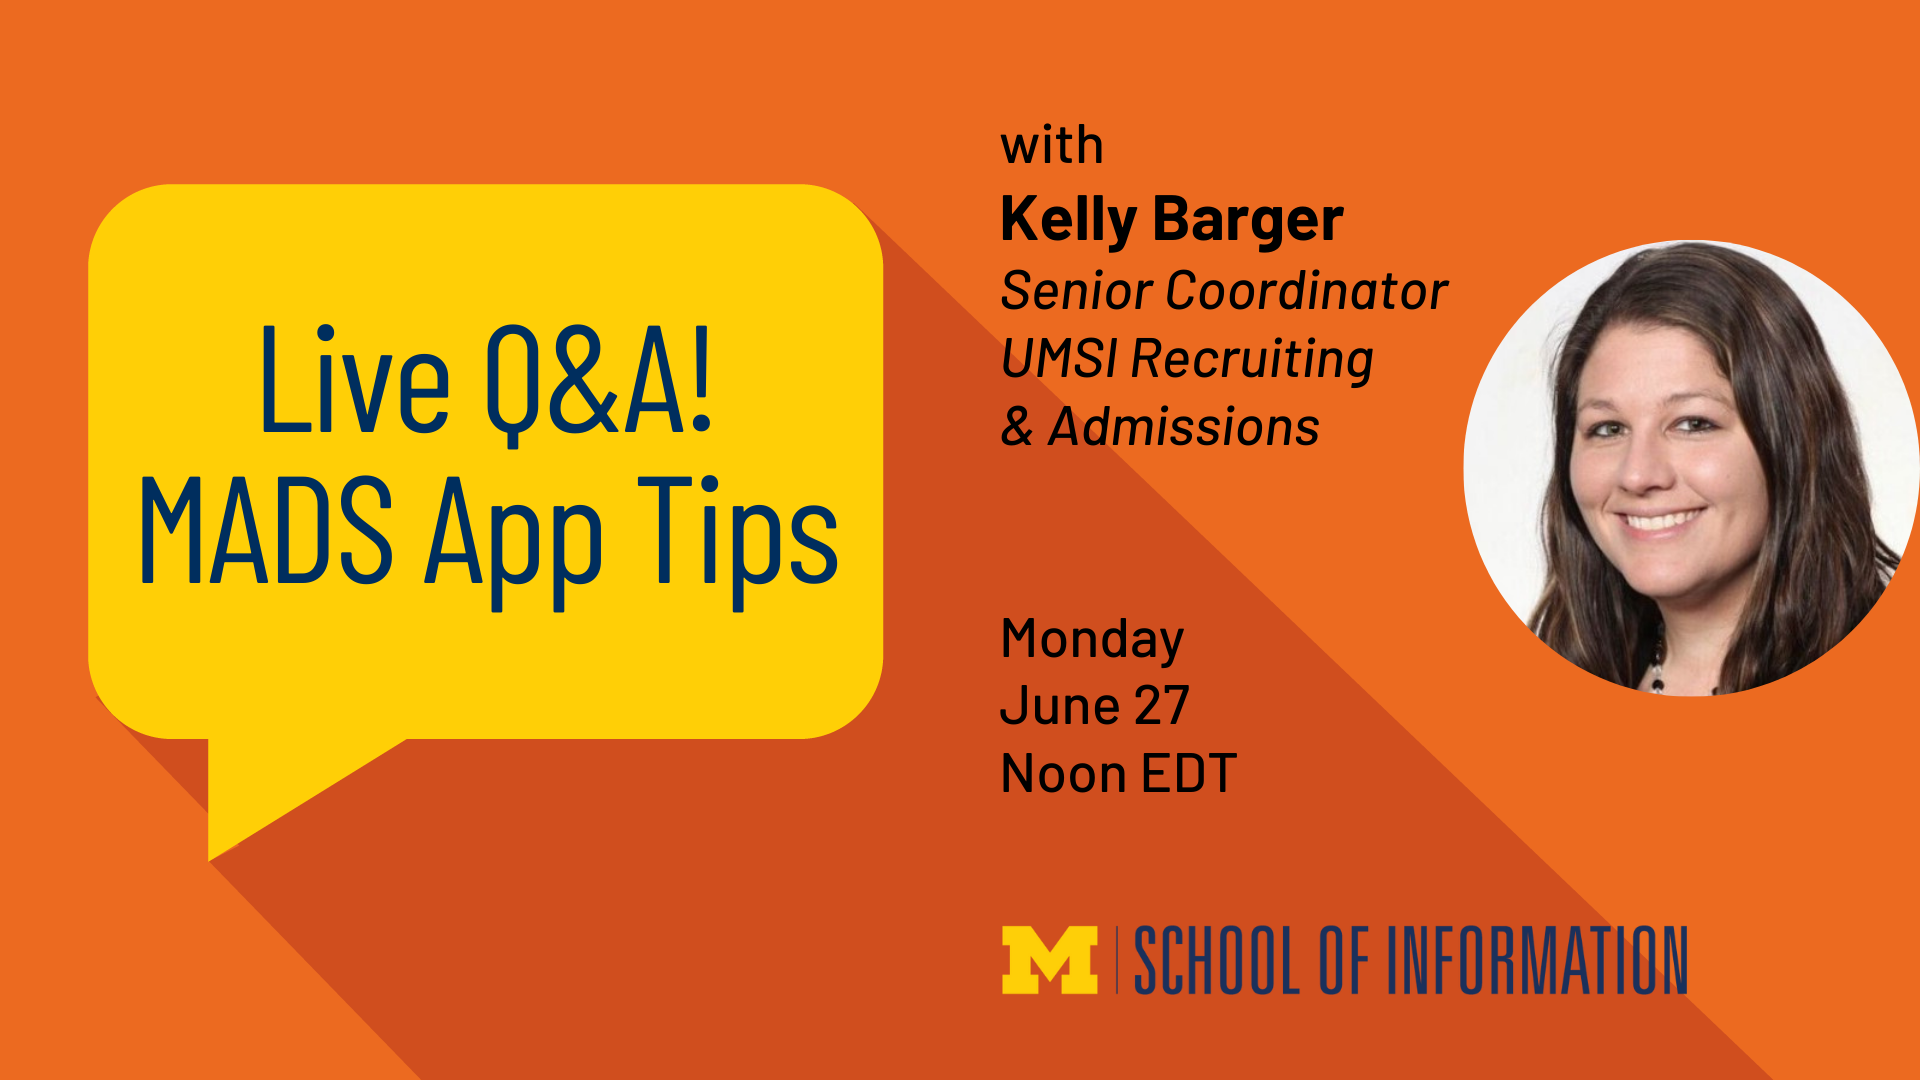 “Live Q&A! MADS App Tips with Kelly Barger. Senior Coordinator, UMSI Recruiting & Admissions. Monday, June 27. Noon EDT.” 